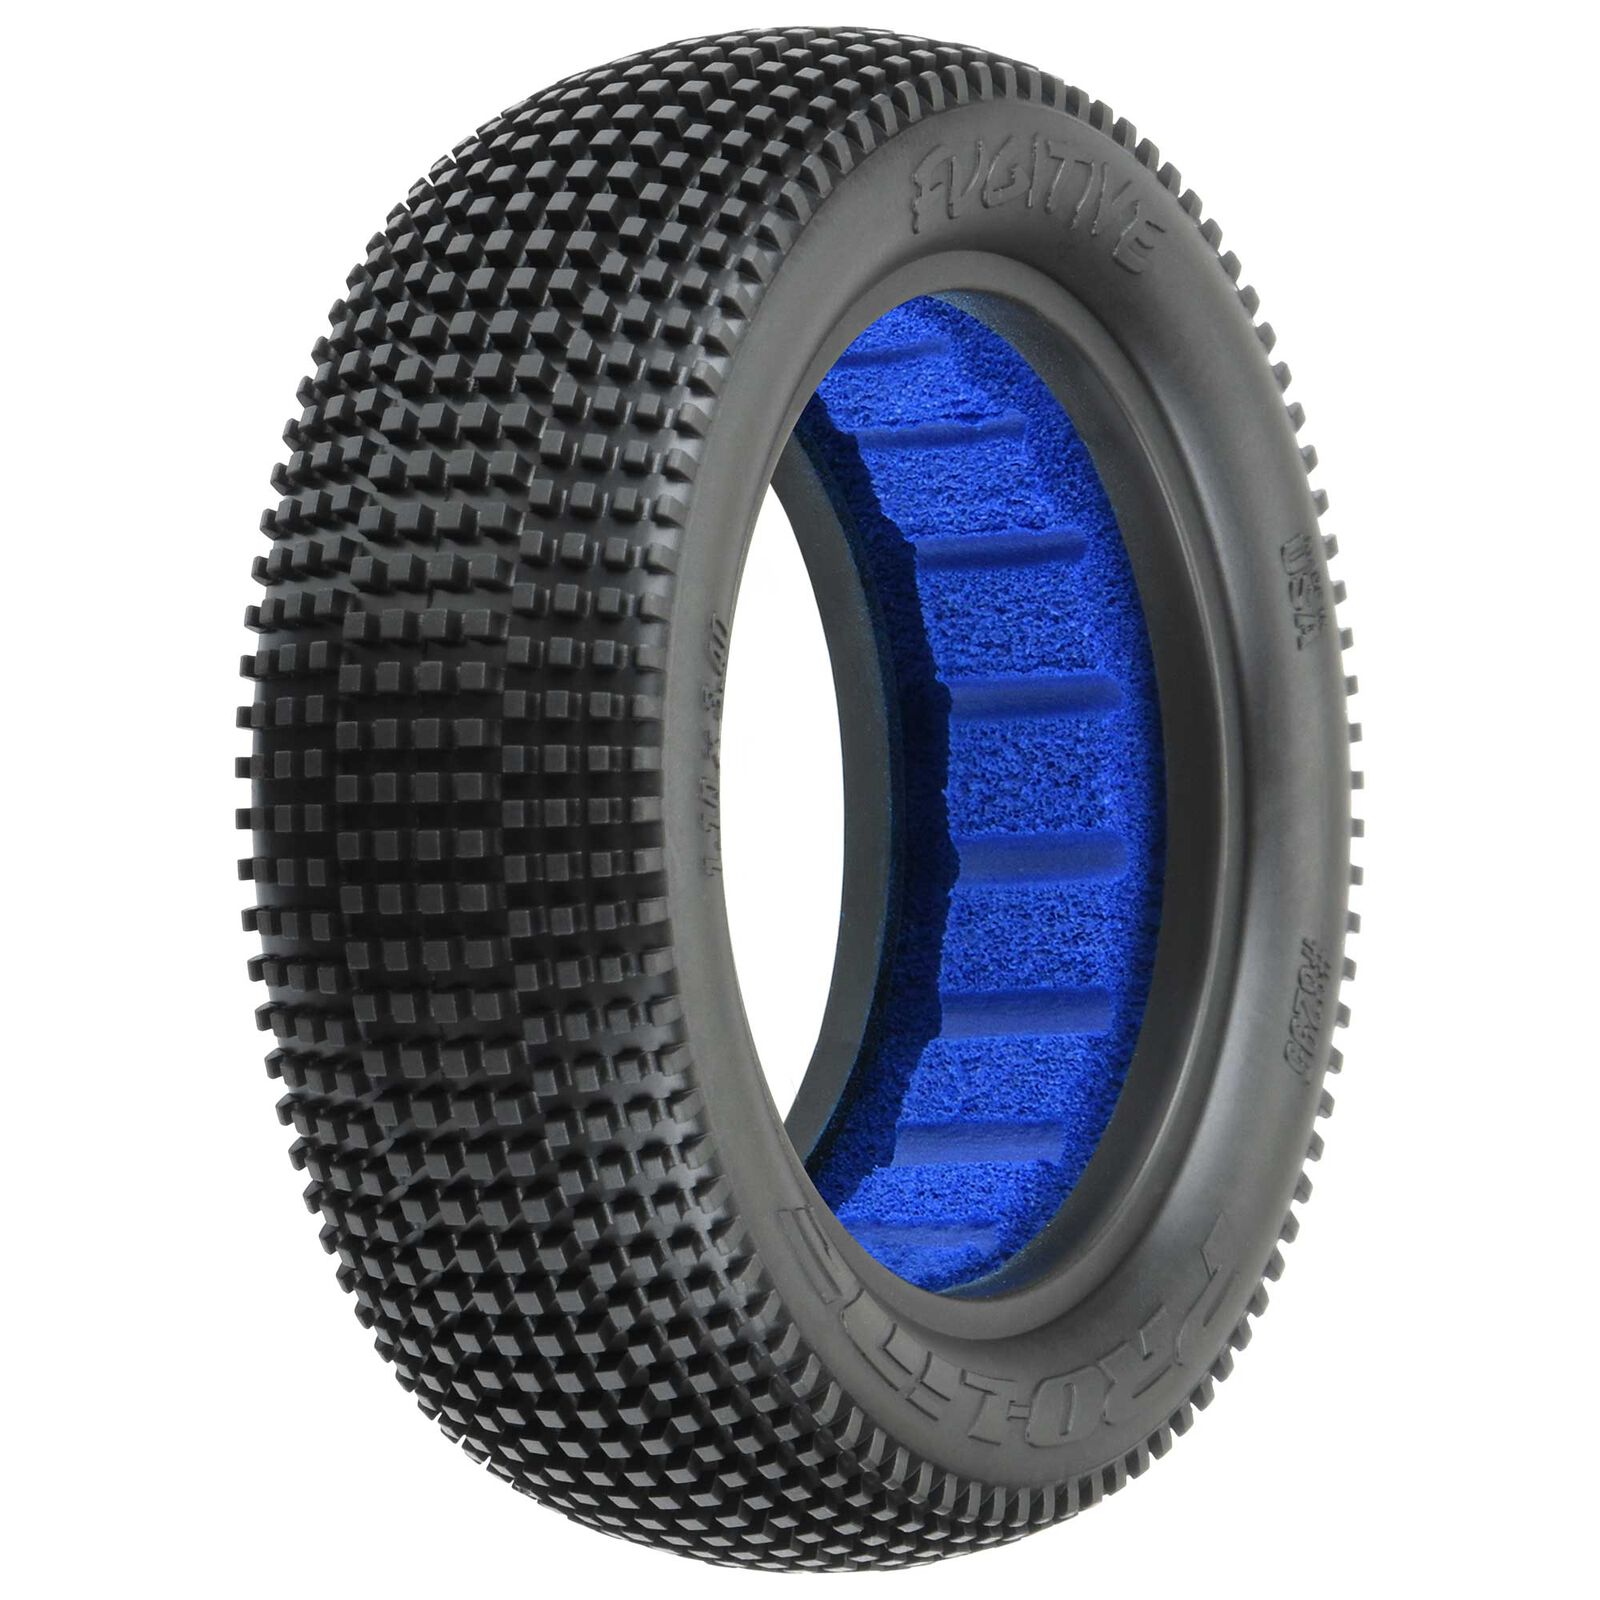 Fugitive 2.2" 2WD M4 Buggy Front Tires (2)